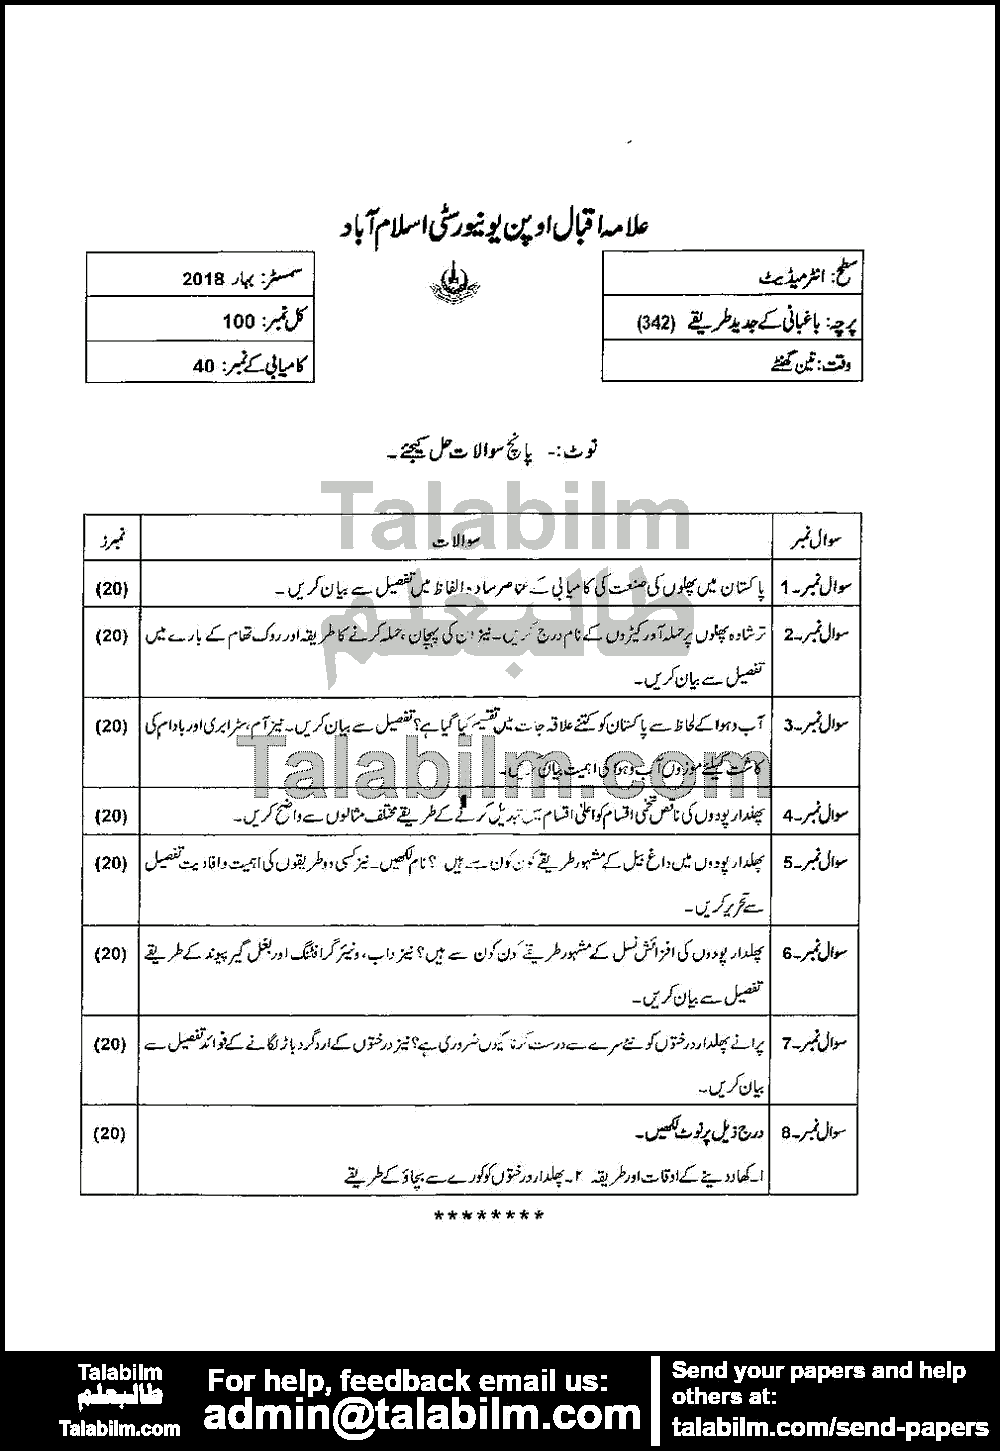 Baghbani Ky Amli Tareeqy 342 past paper for Spring 2018